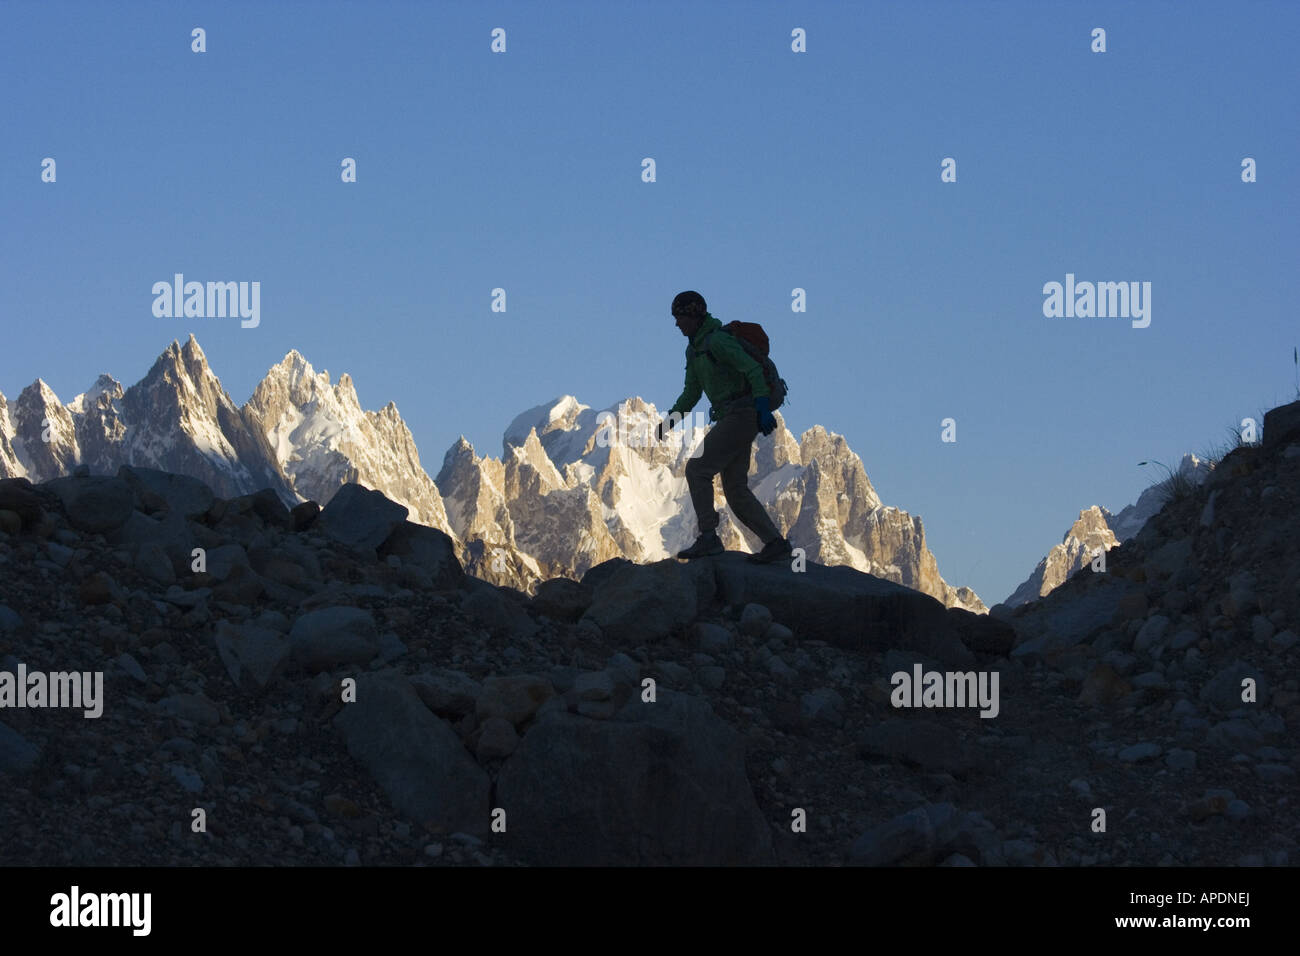 A silhouette of a woman hiker on the Biafo glacier in the Karakoram Himalaya in Pakistan Stock Photo